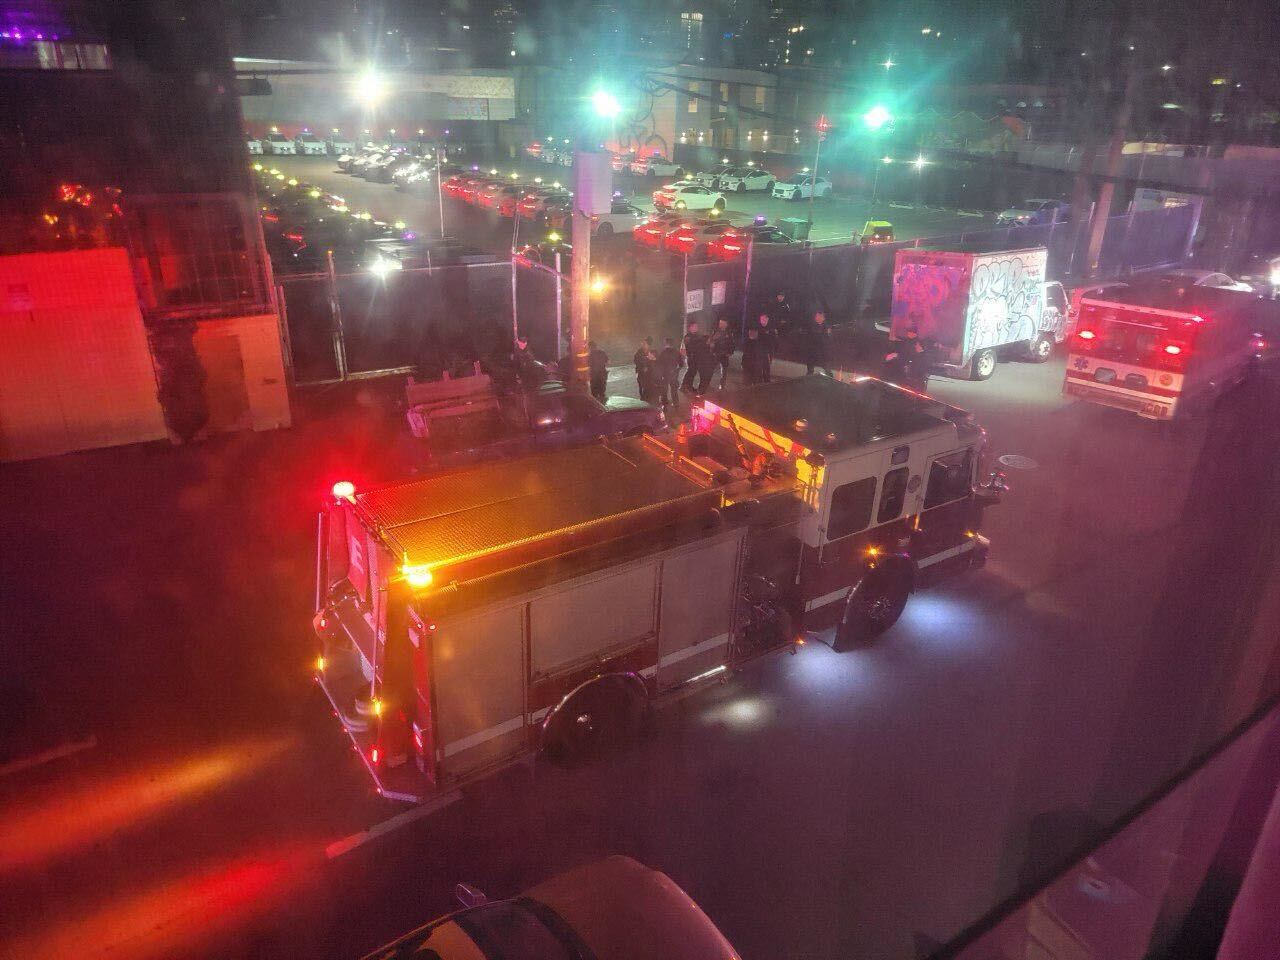 Fire trucks with flashing lights and first responders at night near a parking lot and a graffiti-covered truck.